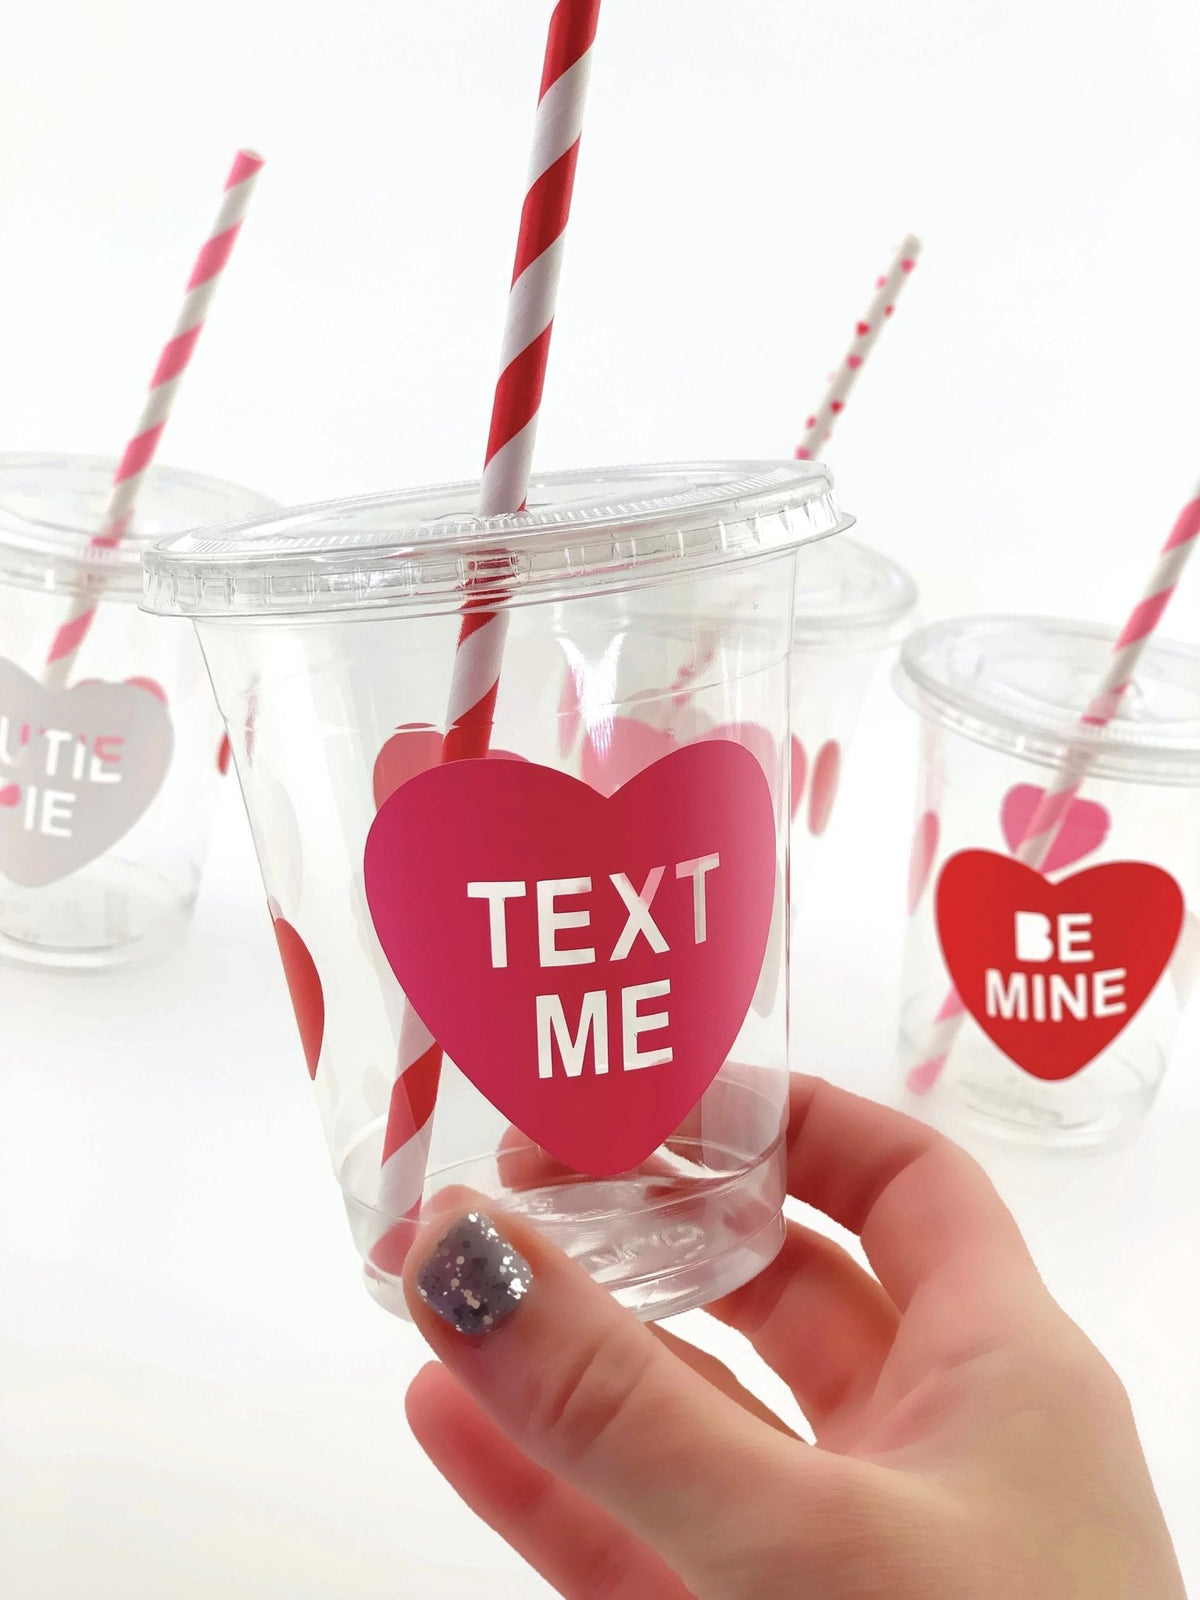 Valentines Day Party Cups Valentine's Day Party Decorations